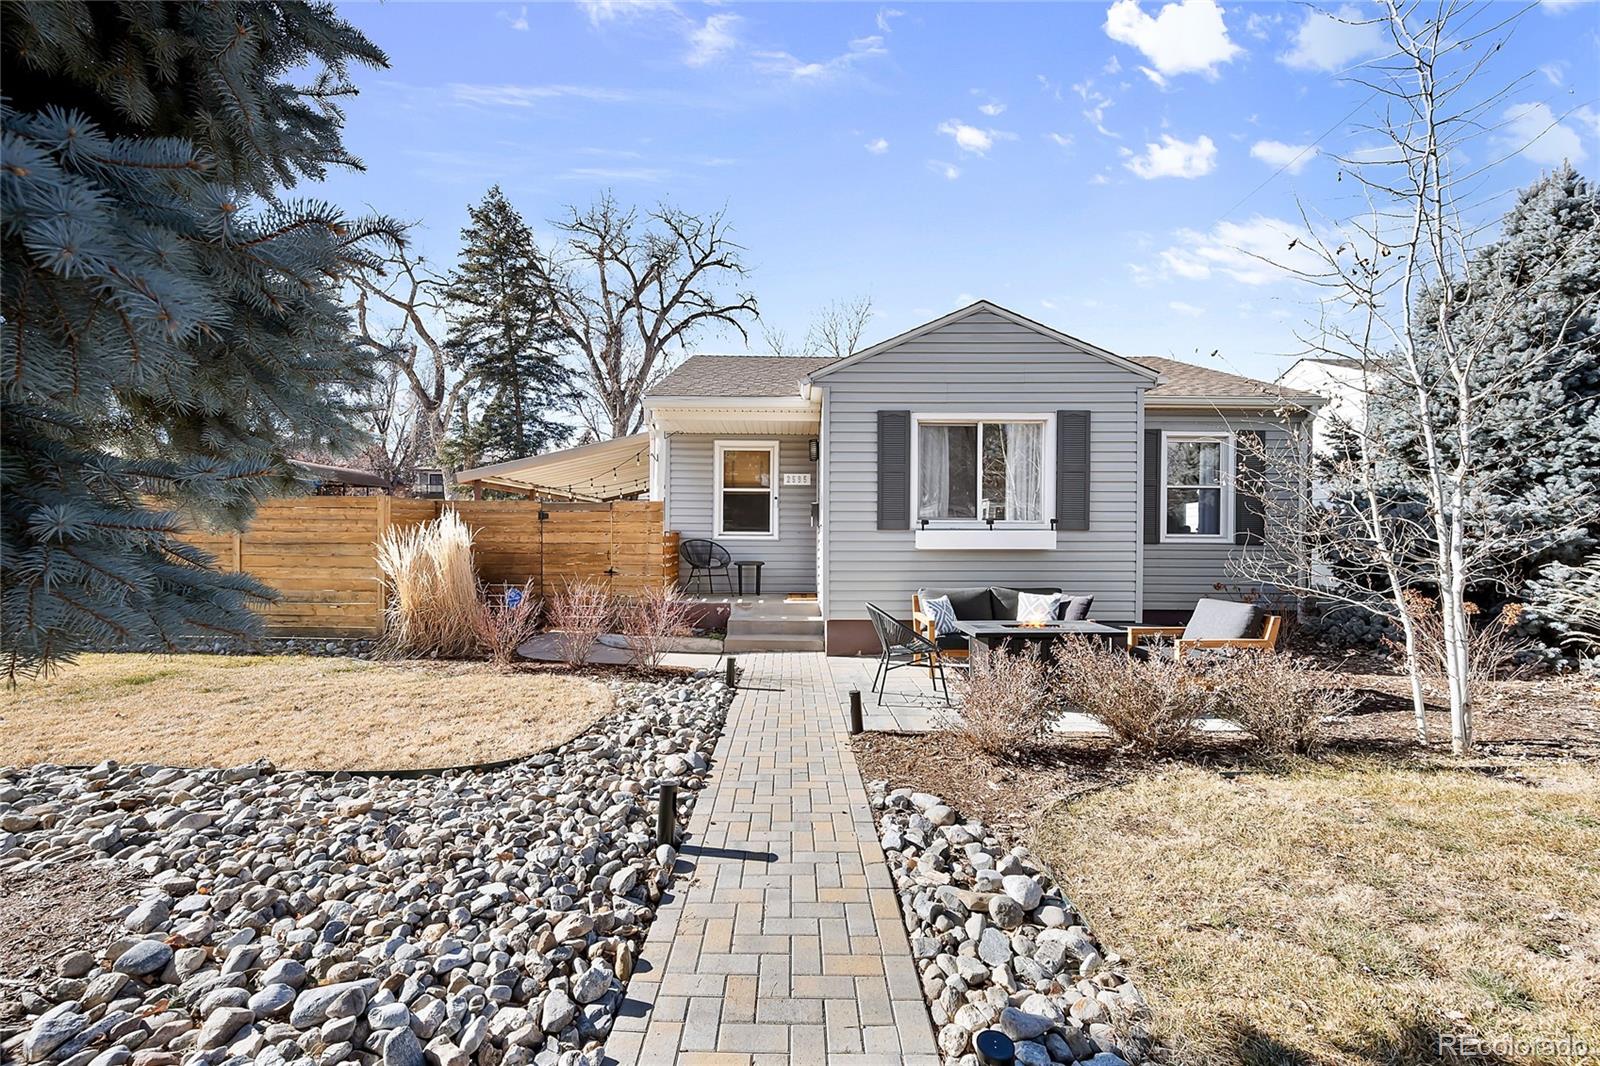 2595 s washington street, Denver sold home. Closed on 2024-03-13 for $725,000.